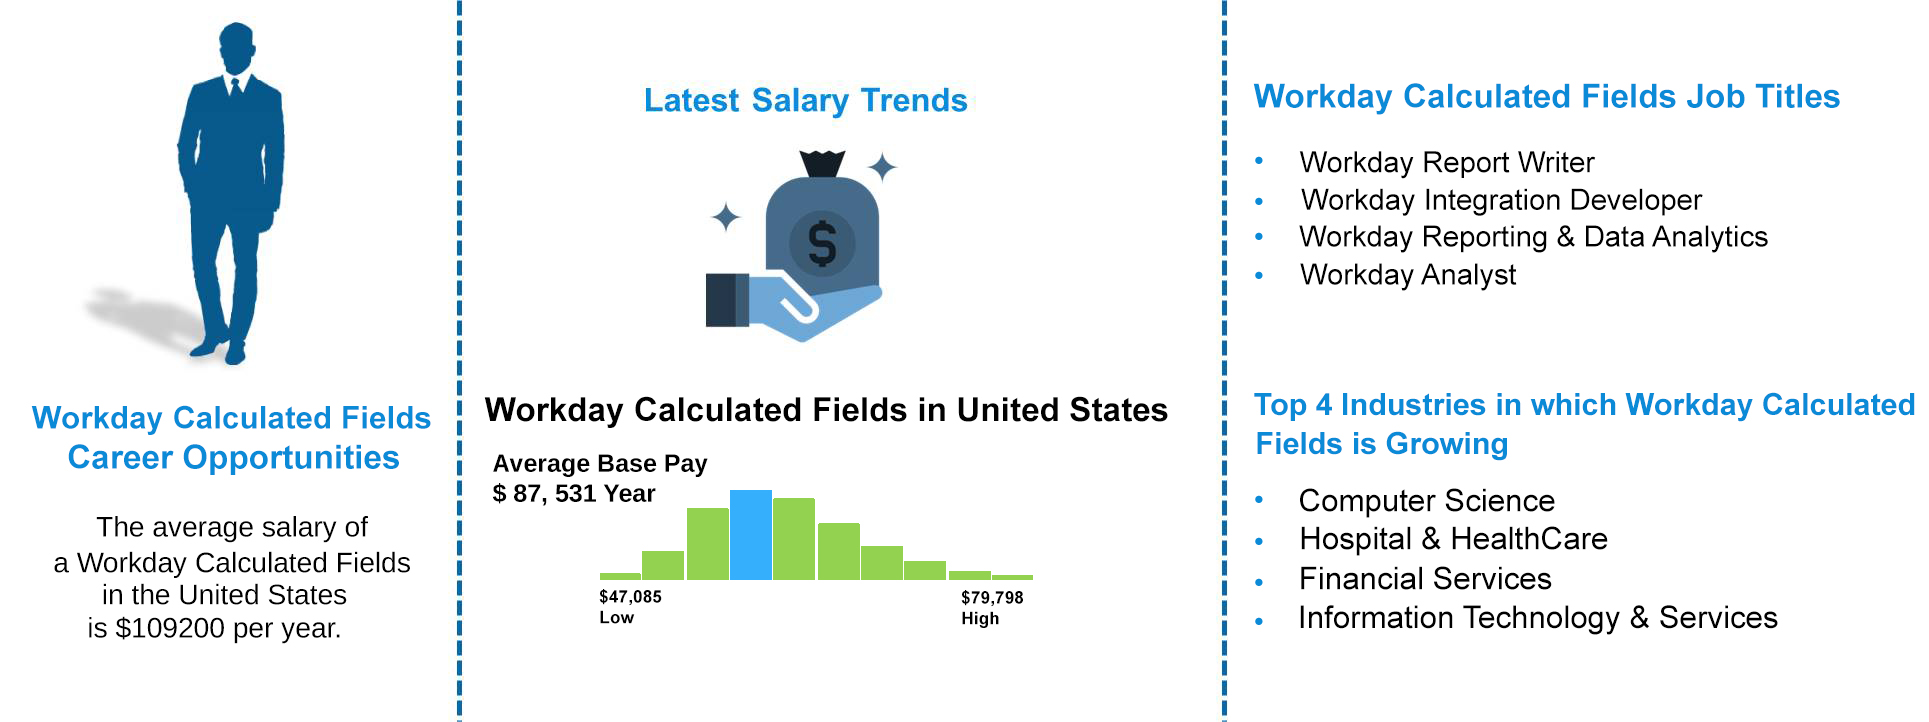 Workday Calculated Fields Job Outlook